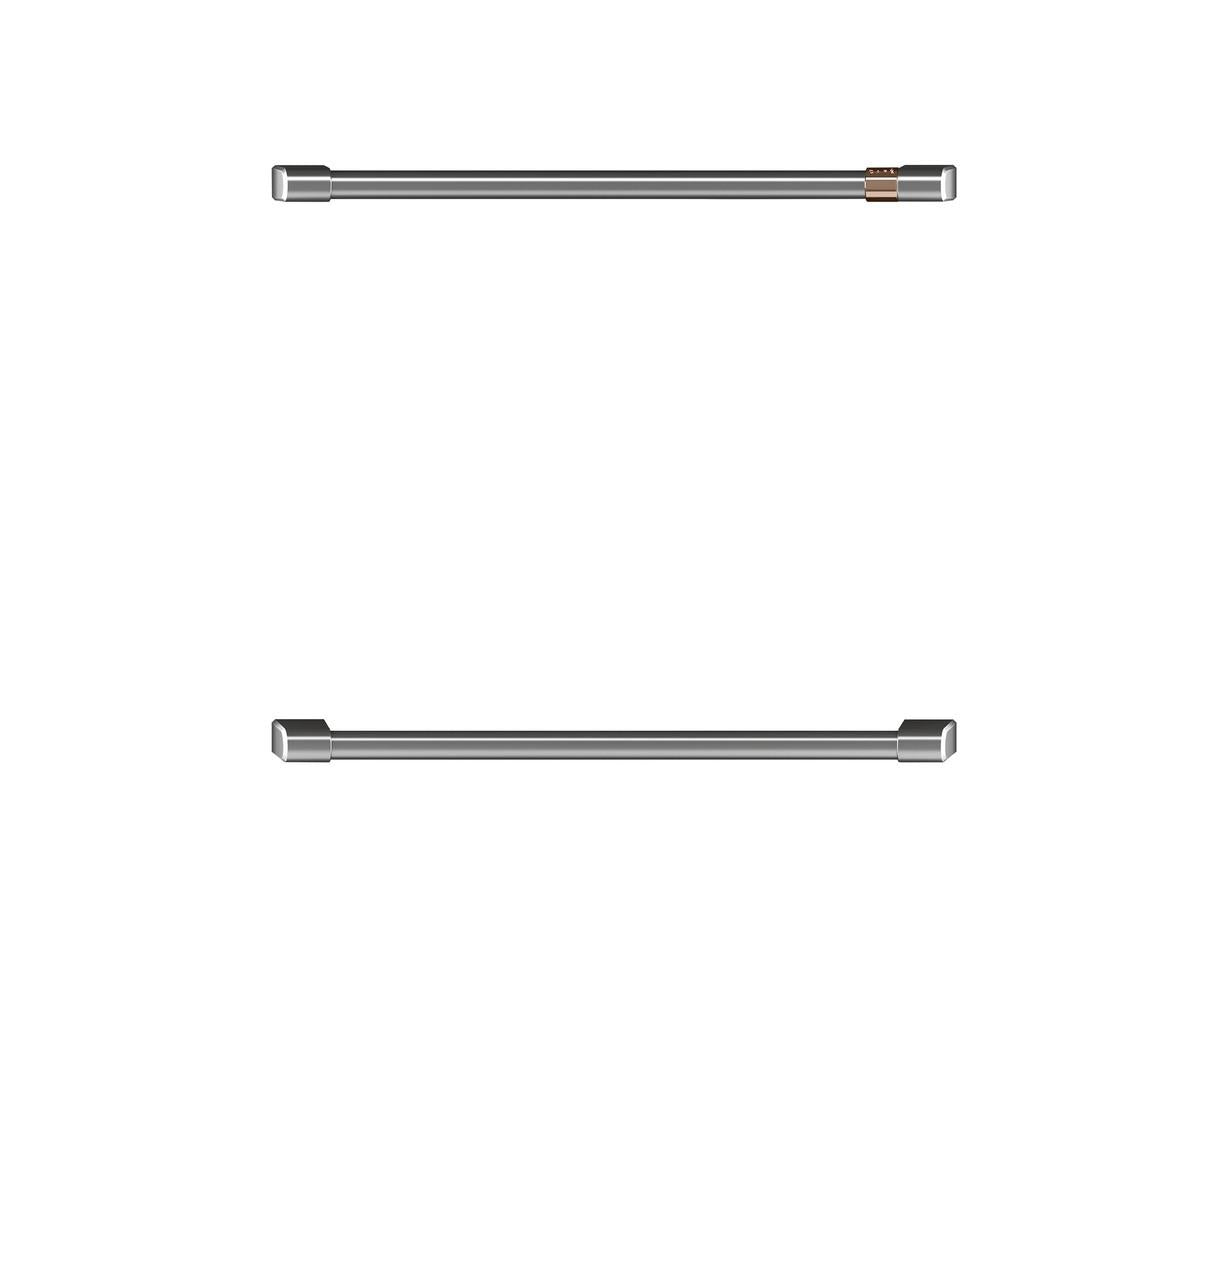 Cafe Caf(eback)™ 2 - 30" Double Wall Oven Handles - Brushed Stainless